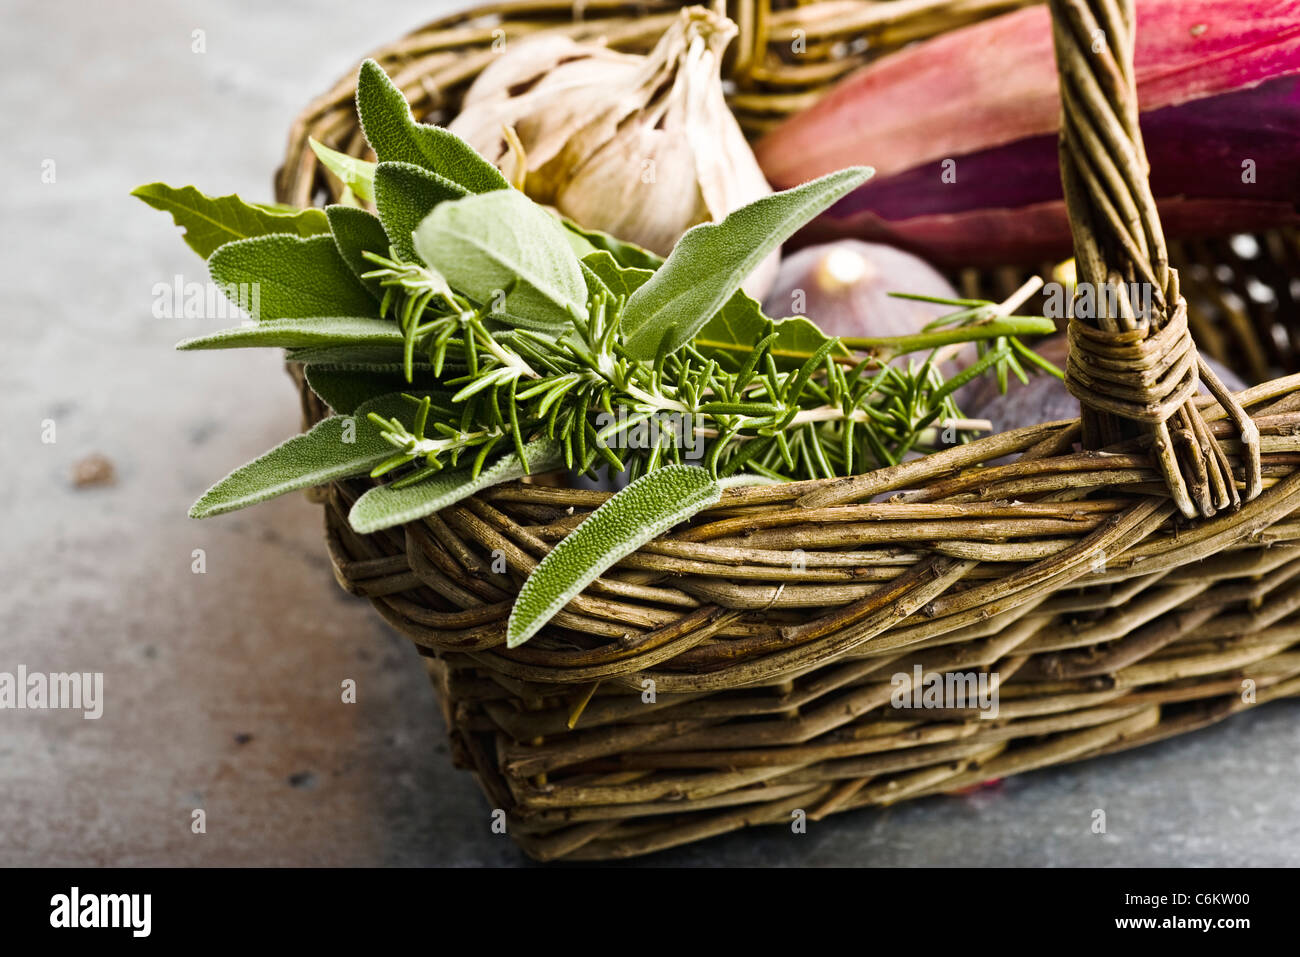 Fresh rosemary, sage, and other ingredients in basket Stock Photo